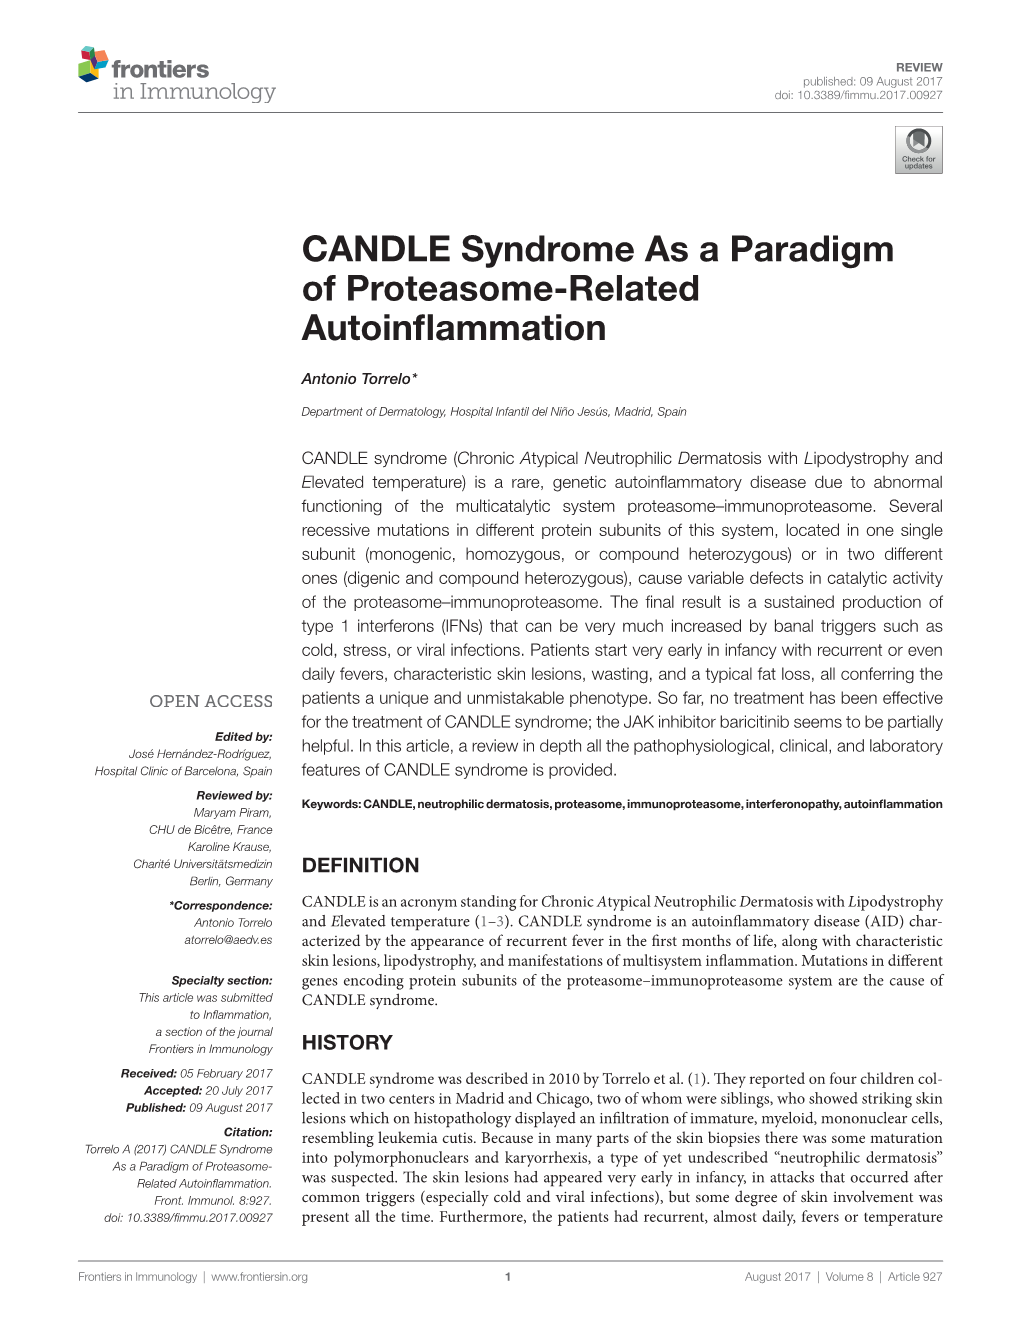 Candle Syndrome As a Paradigm of Proteasome-Related Autoinflammation